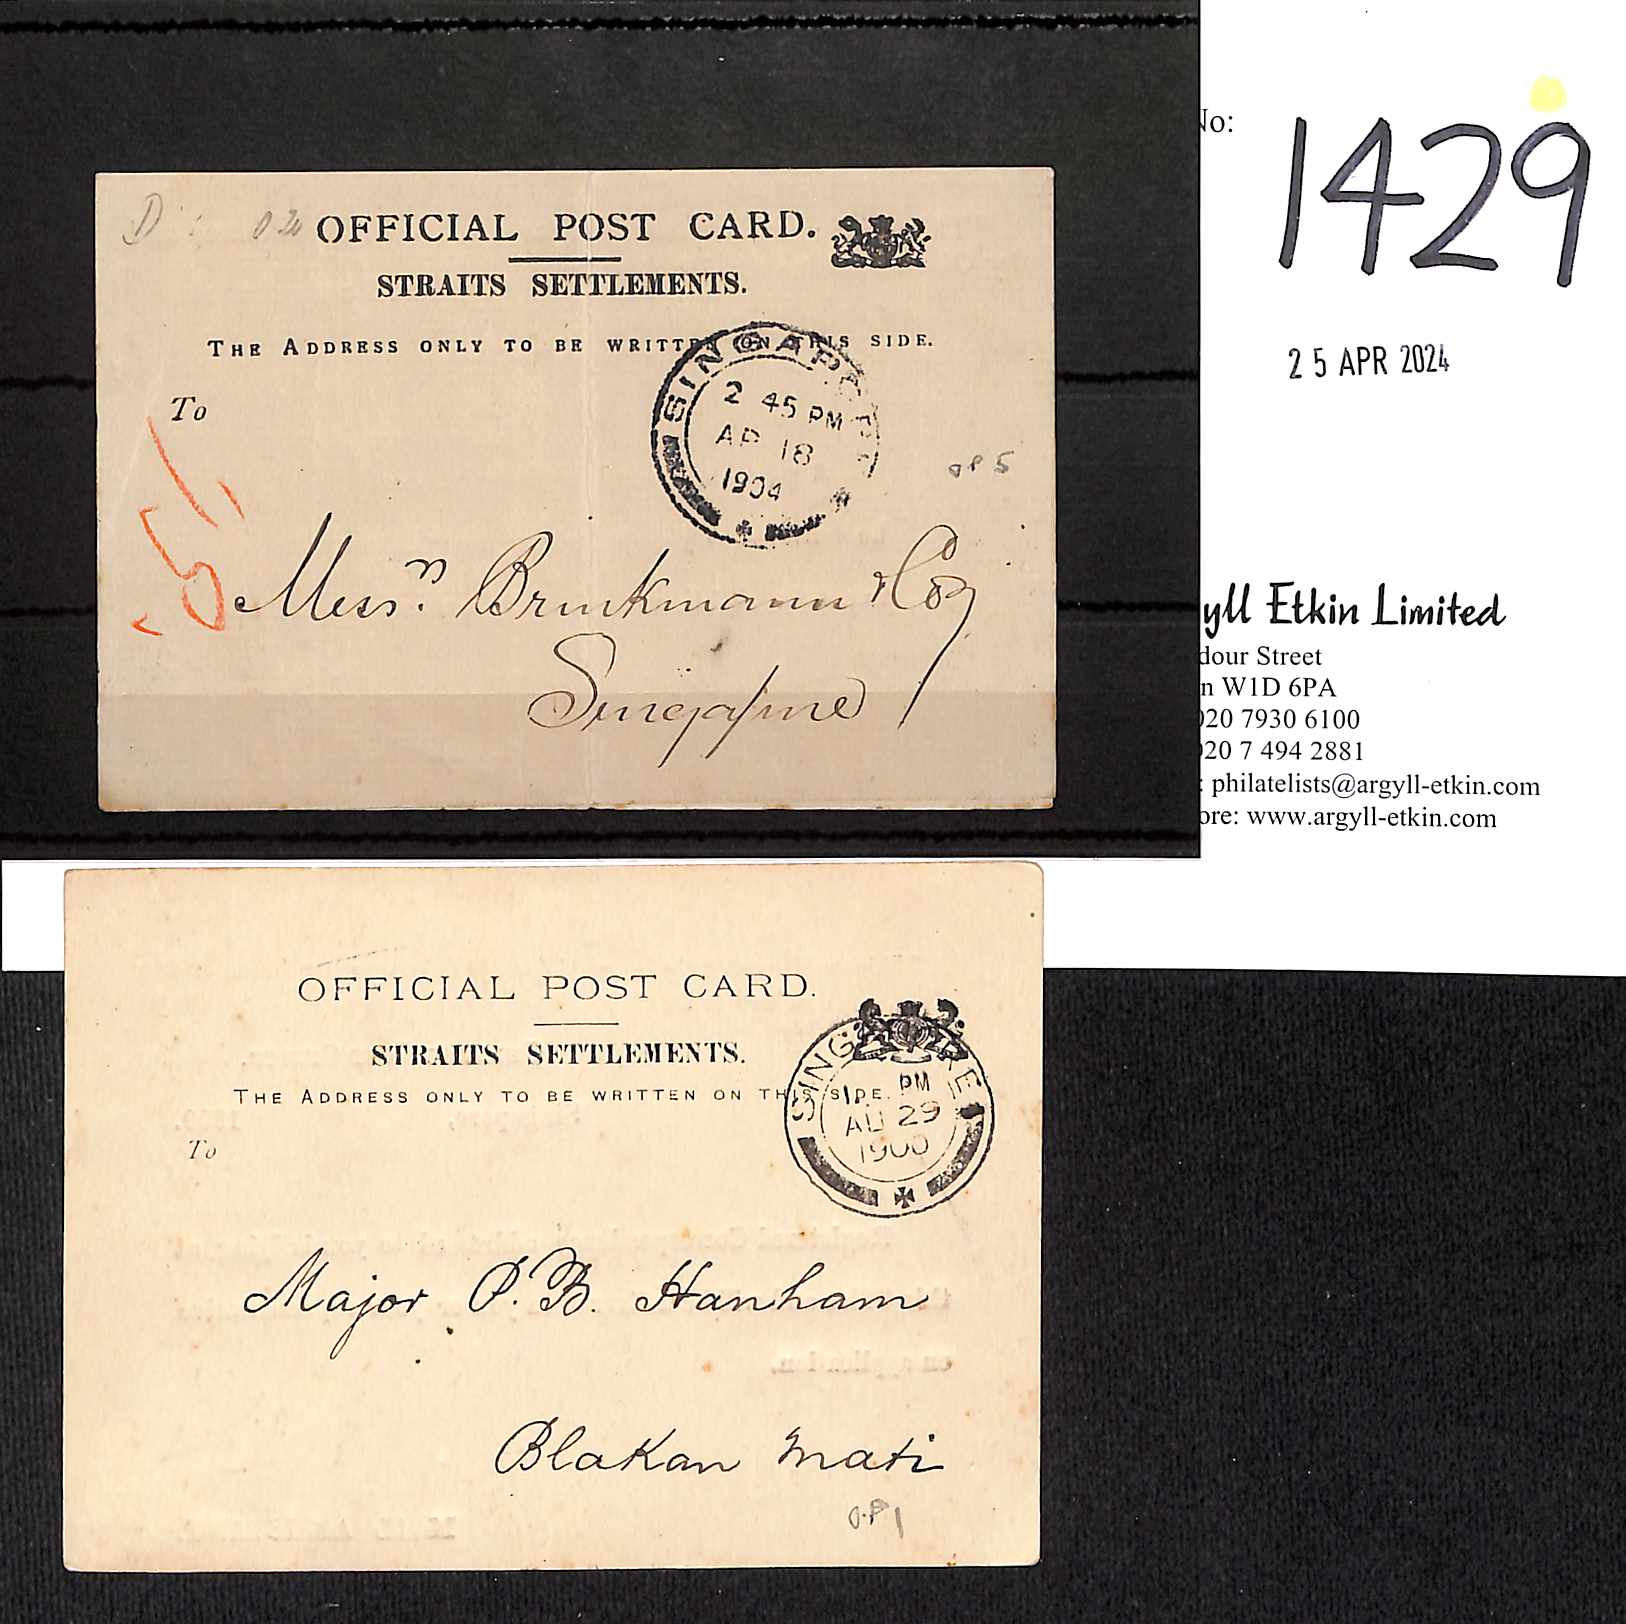 1900-04 Official Post Cards with small royal arms at right, differing fount types for the heading,